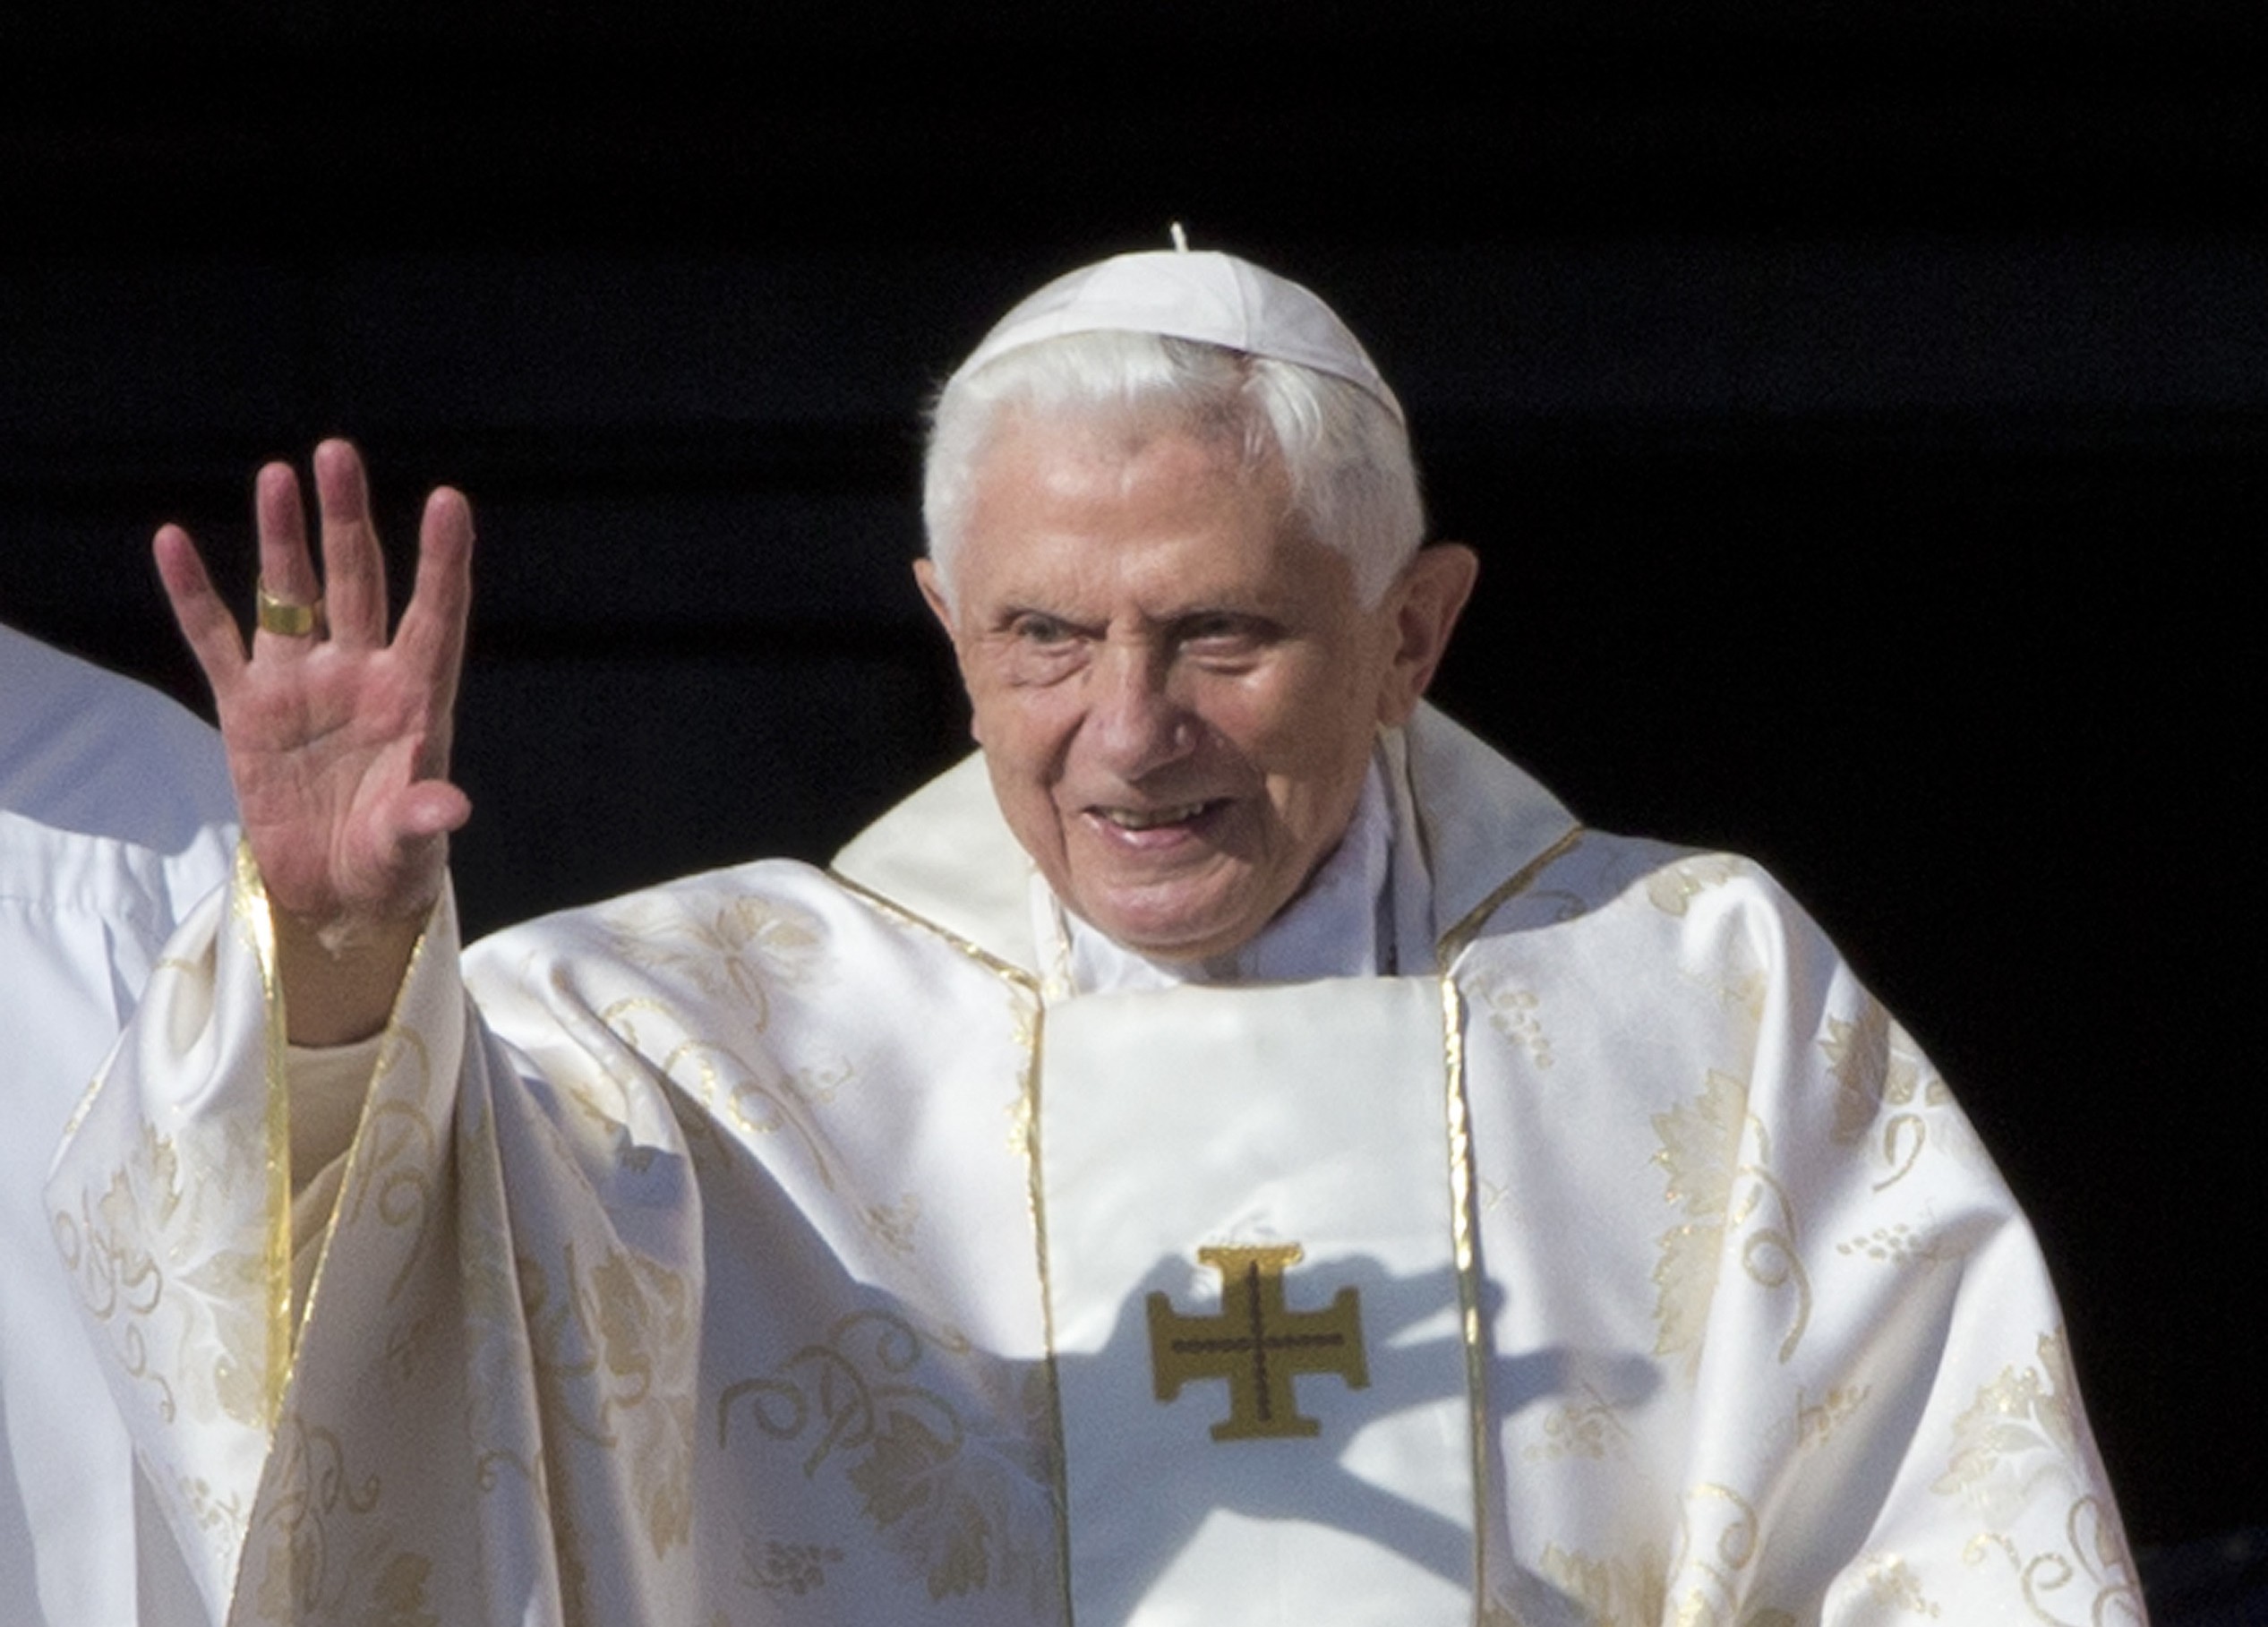 Pope Emeritus Benedict XVI arrives in St. Peter's Square at the Vatican on October 19, 2014. Photo: AP